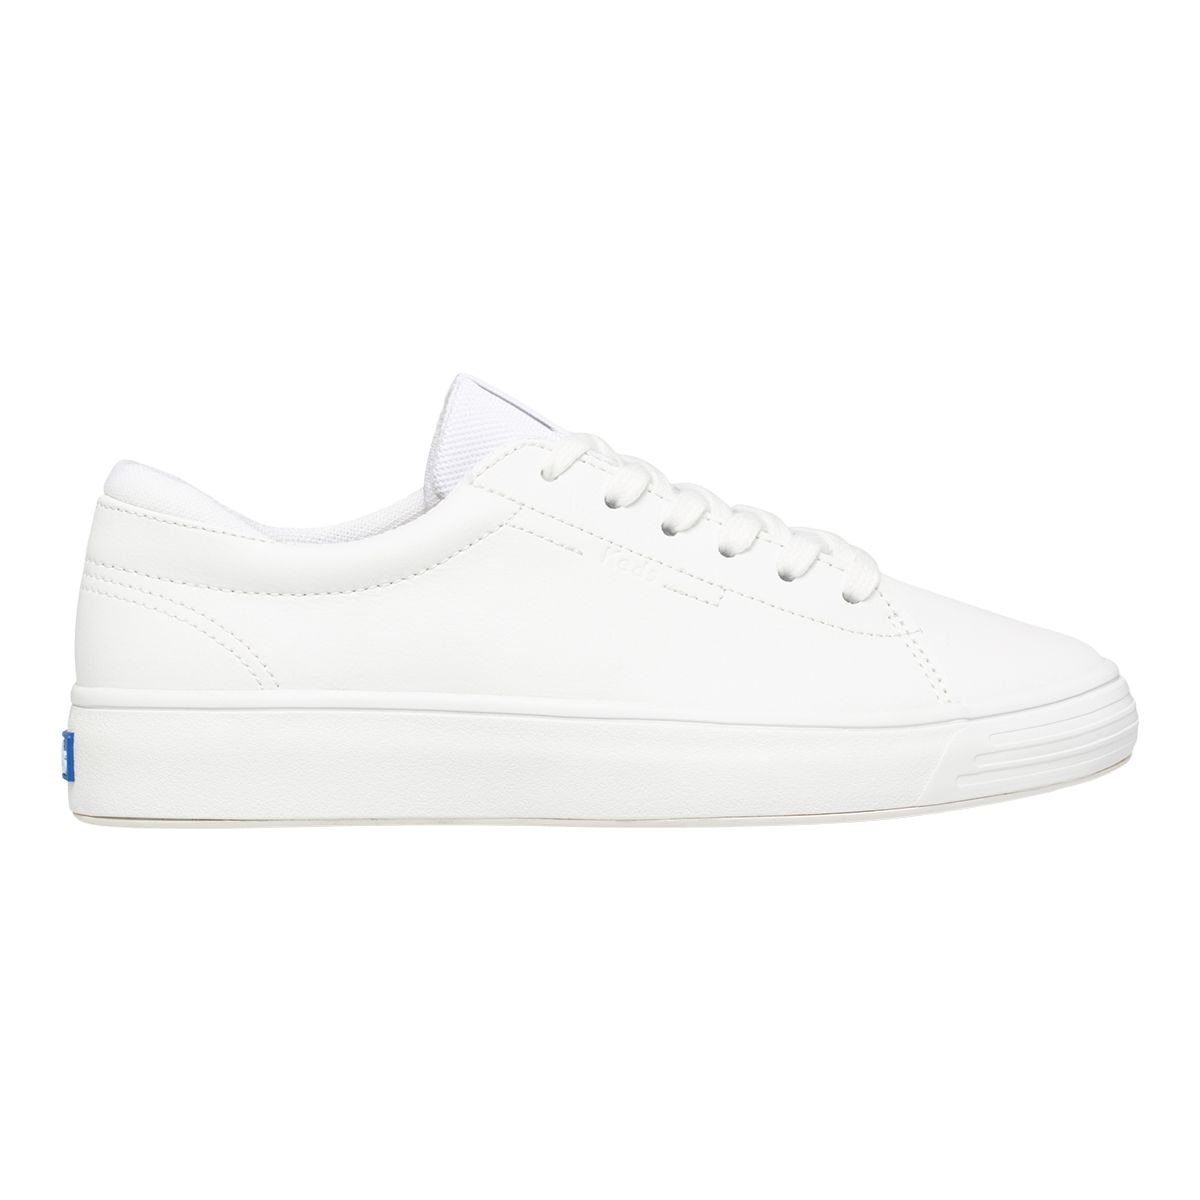 Keds Women's Alley Leather Shoes